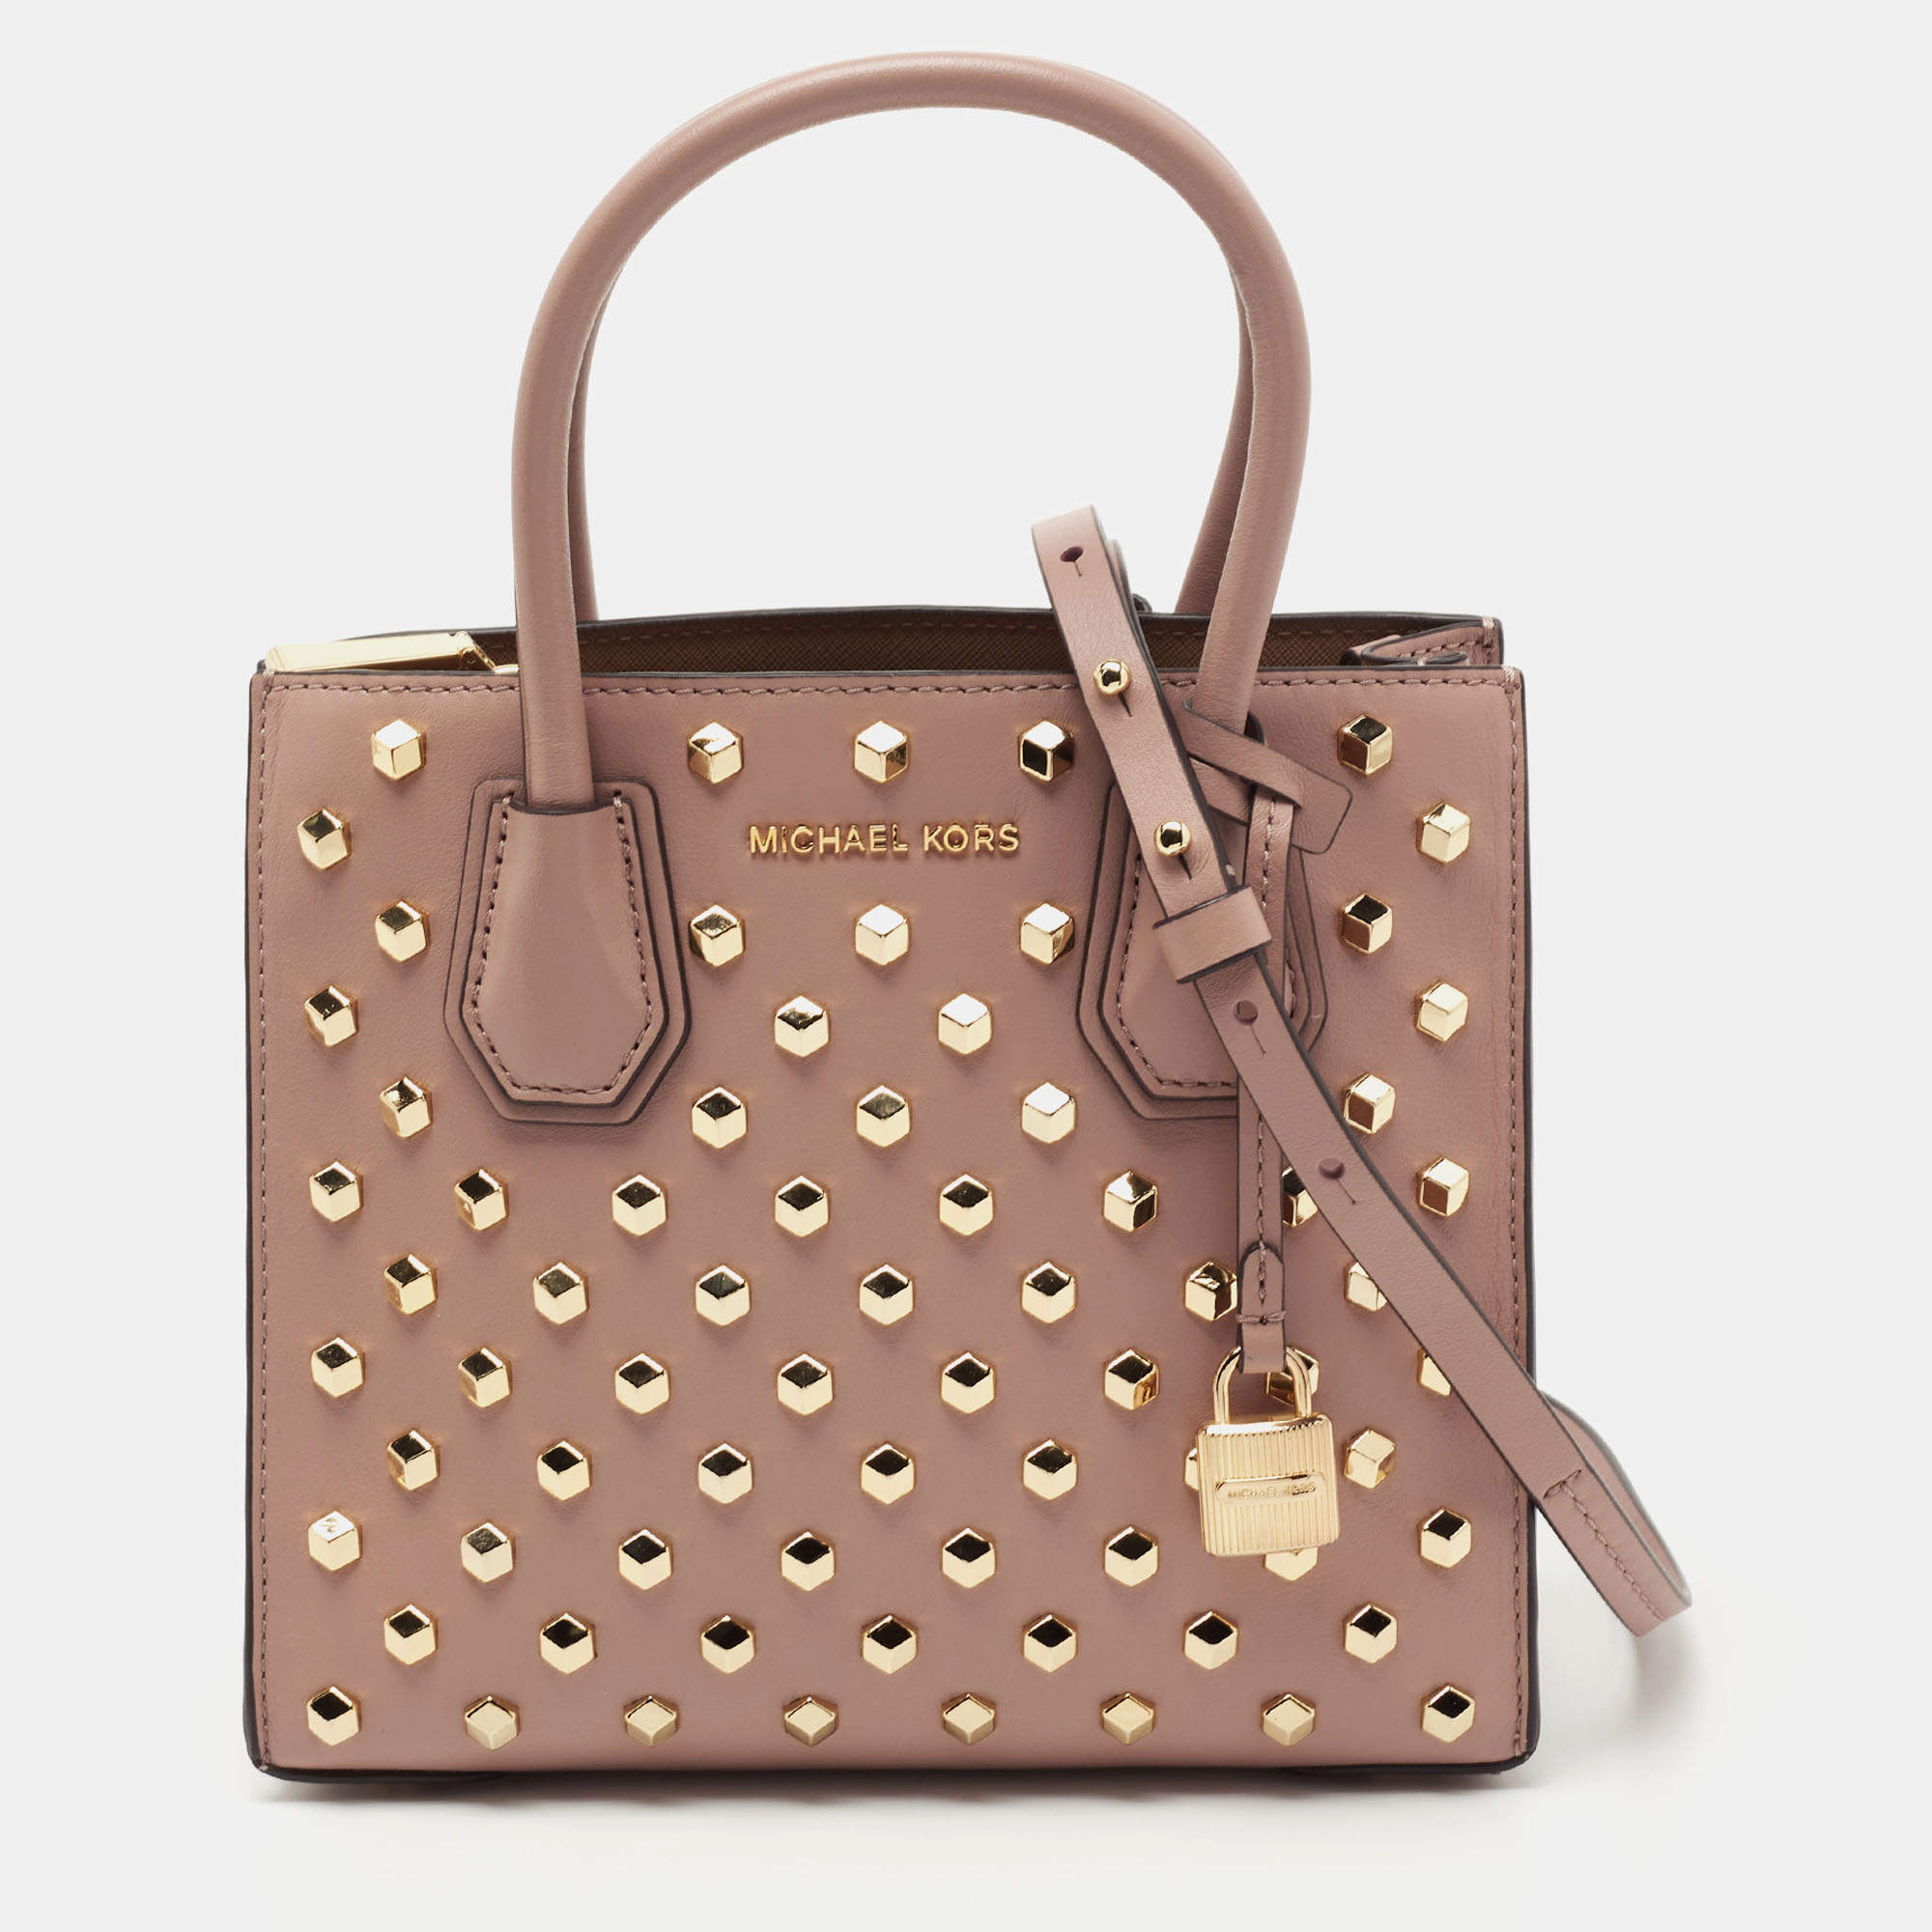 Michael Kors Dusty Pink Studded Leather Mercer Tote